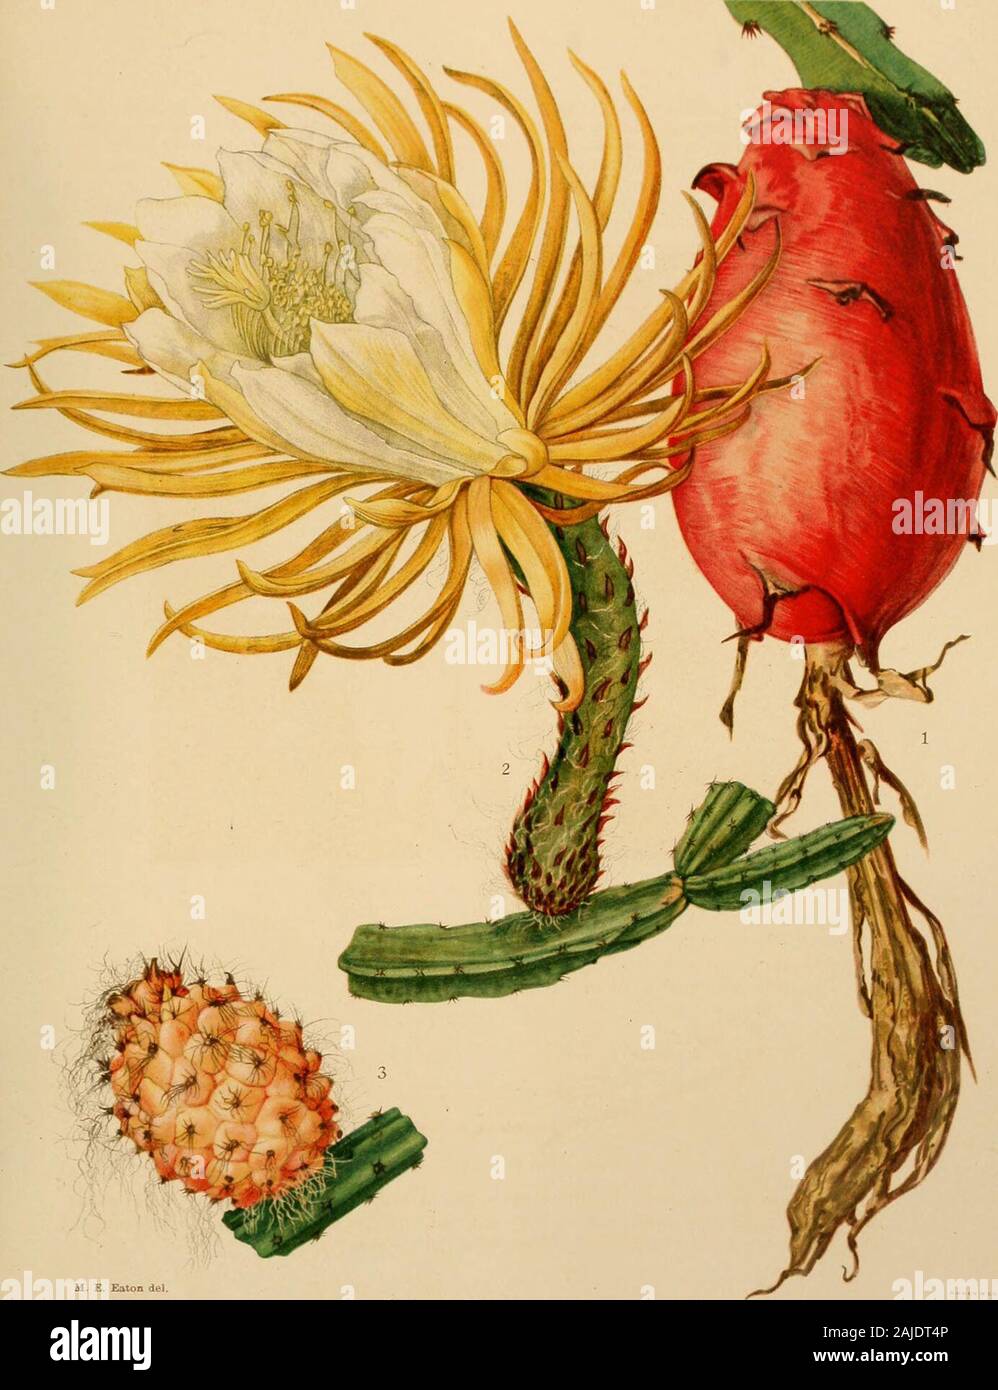 The Cactaceae : descriptions and illustrations of plants of the cactus family . Fig. 282.—Selenicereus hamatus. Type locality: Mexico. Distribution: Southern and eastern Mexico. According to the Index Kewensis Cereus rostratus occurs on the island of Antigua,but Dr. Rose was unable to find it there in 1913. Fig. 283.—Part of branch of S. hamatus. X0.5. This species is common in cultivation in greenhouses and is occasionally seen in yardsand patios in Mexico. Although we have seen no wild specimens, it seems to be commonalong the eastern coast of Mexico, probably in the wooded regions. BRITTON Stock Photo